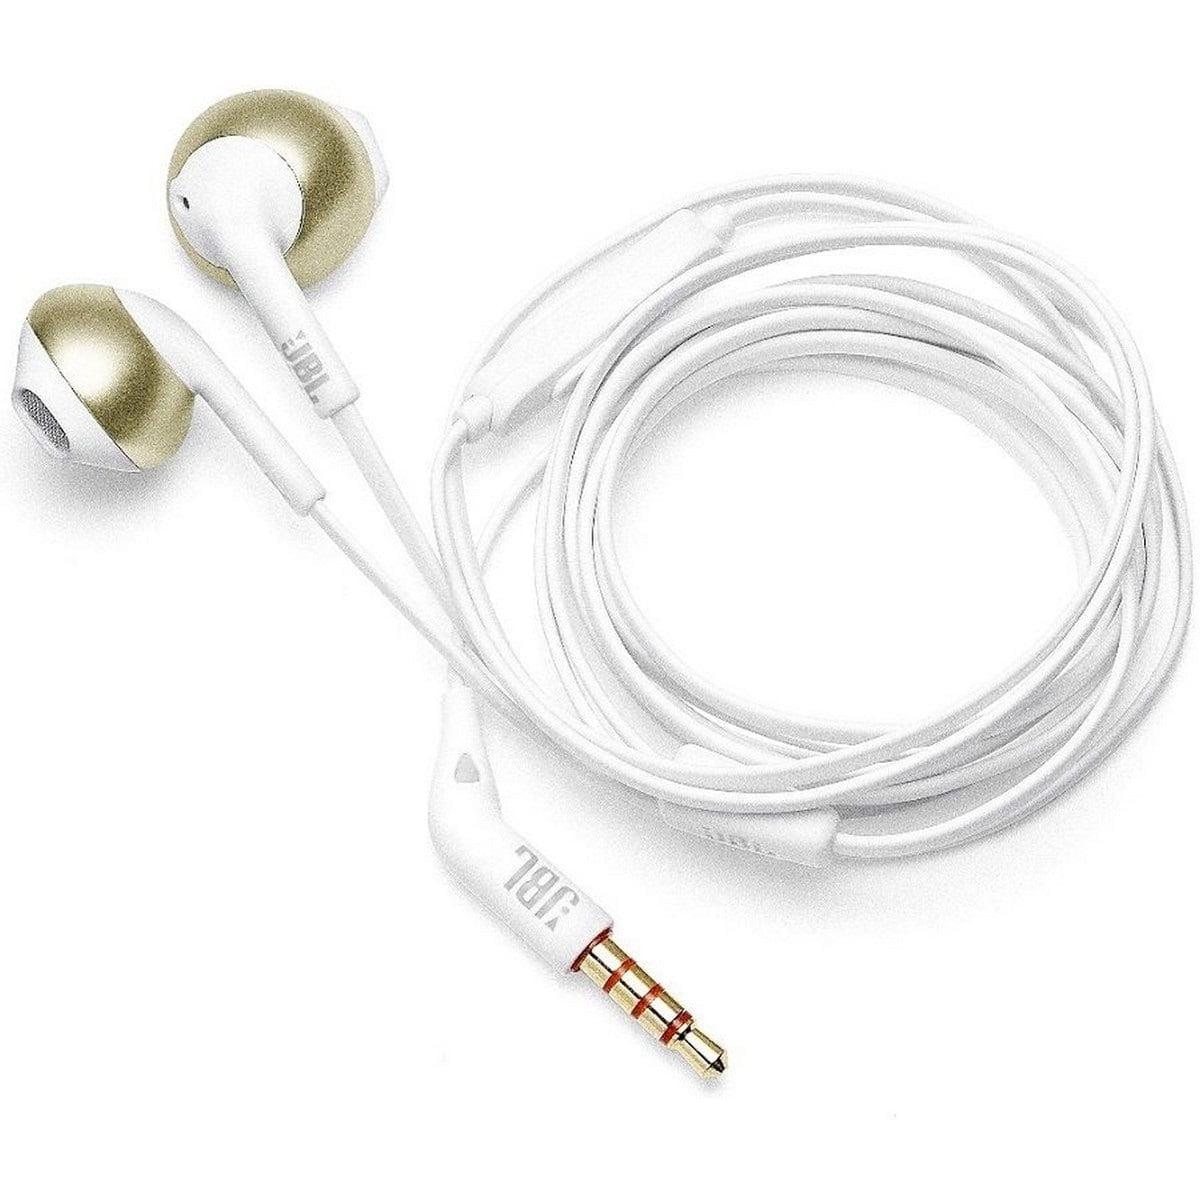 1374567 01 Jbl &Amp;Lt;H1&Amp;Gt;Jbl Tune 205 In-Ear Wired Earphones-Gold&Amp;Lt;/H1&Amp;Gt; Introducing Jbl Tune205 Earbud Headphones With Jbl Pure Bass Sound. They’re Lightweight, Comfortable And Compact. Under The Premium Metalized Housing, A Pair Of 12.5 Mm Drivers Punch Out Some Serious Bass, While The Soft, Ergonomically Shaped Earbuds Ensure The Listening Experience Remains Comfortable For Long-Listening Hours. In Addition, A Single-Button Remote Lets You Control Music Playback, As Well As Answer Calls On The Fly With The Built-In Microphone, Making The Jbl Tune205 Your Everyday Companion For Work, At Home And On The Road. Jbl Earphones Jbl Tune 205 In-Ear Wired Earphones-Gold